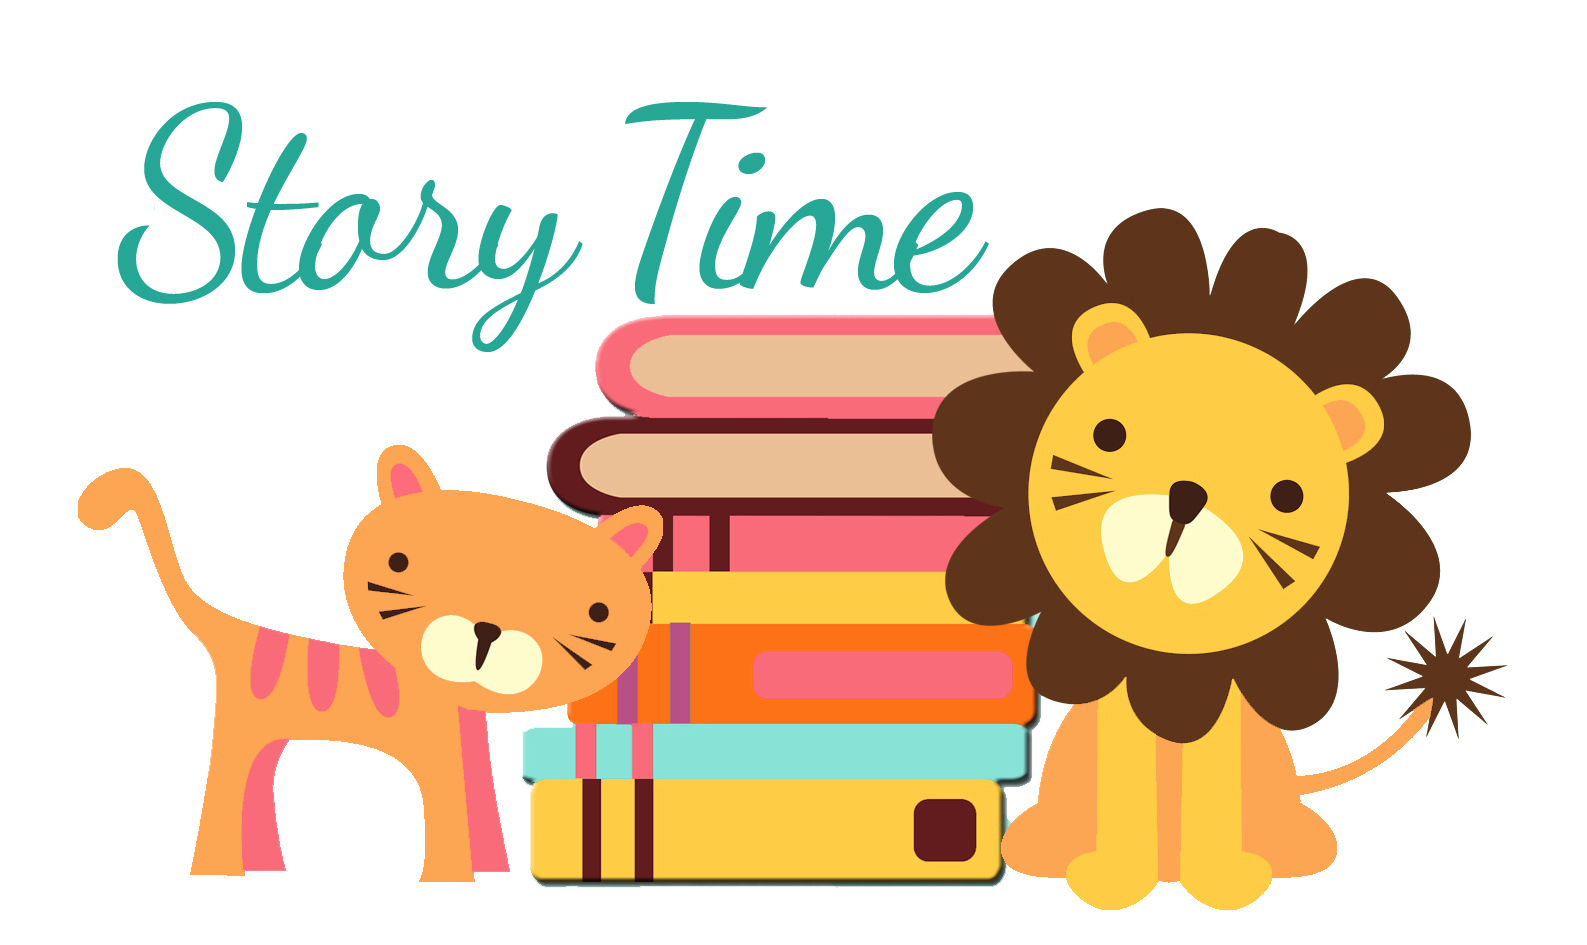 Graphic depicting storytime